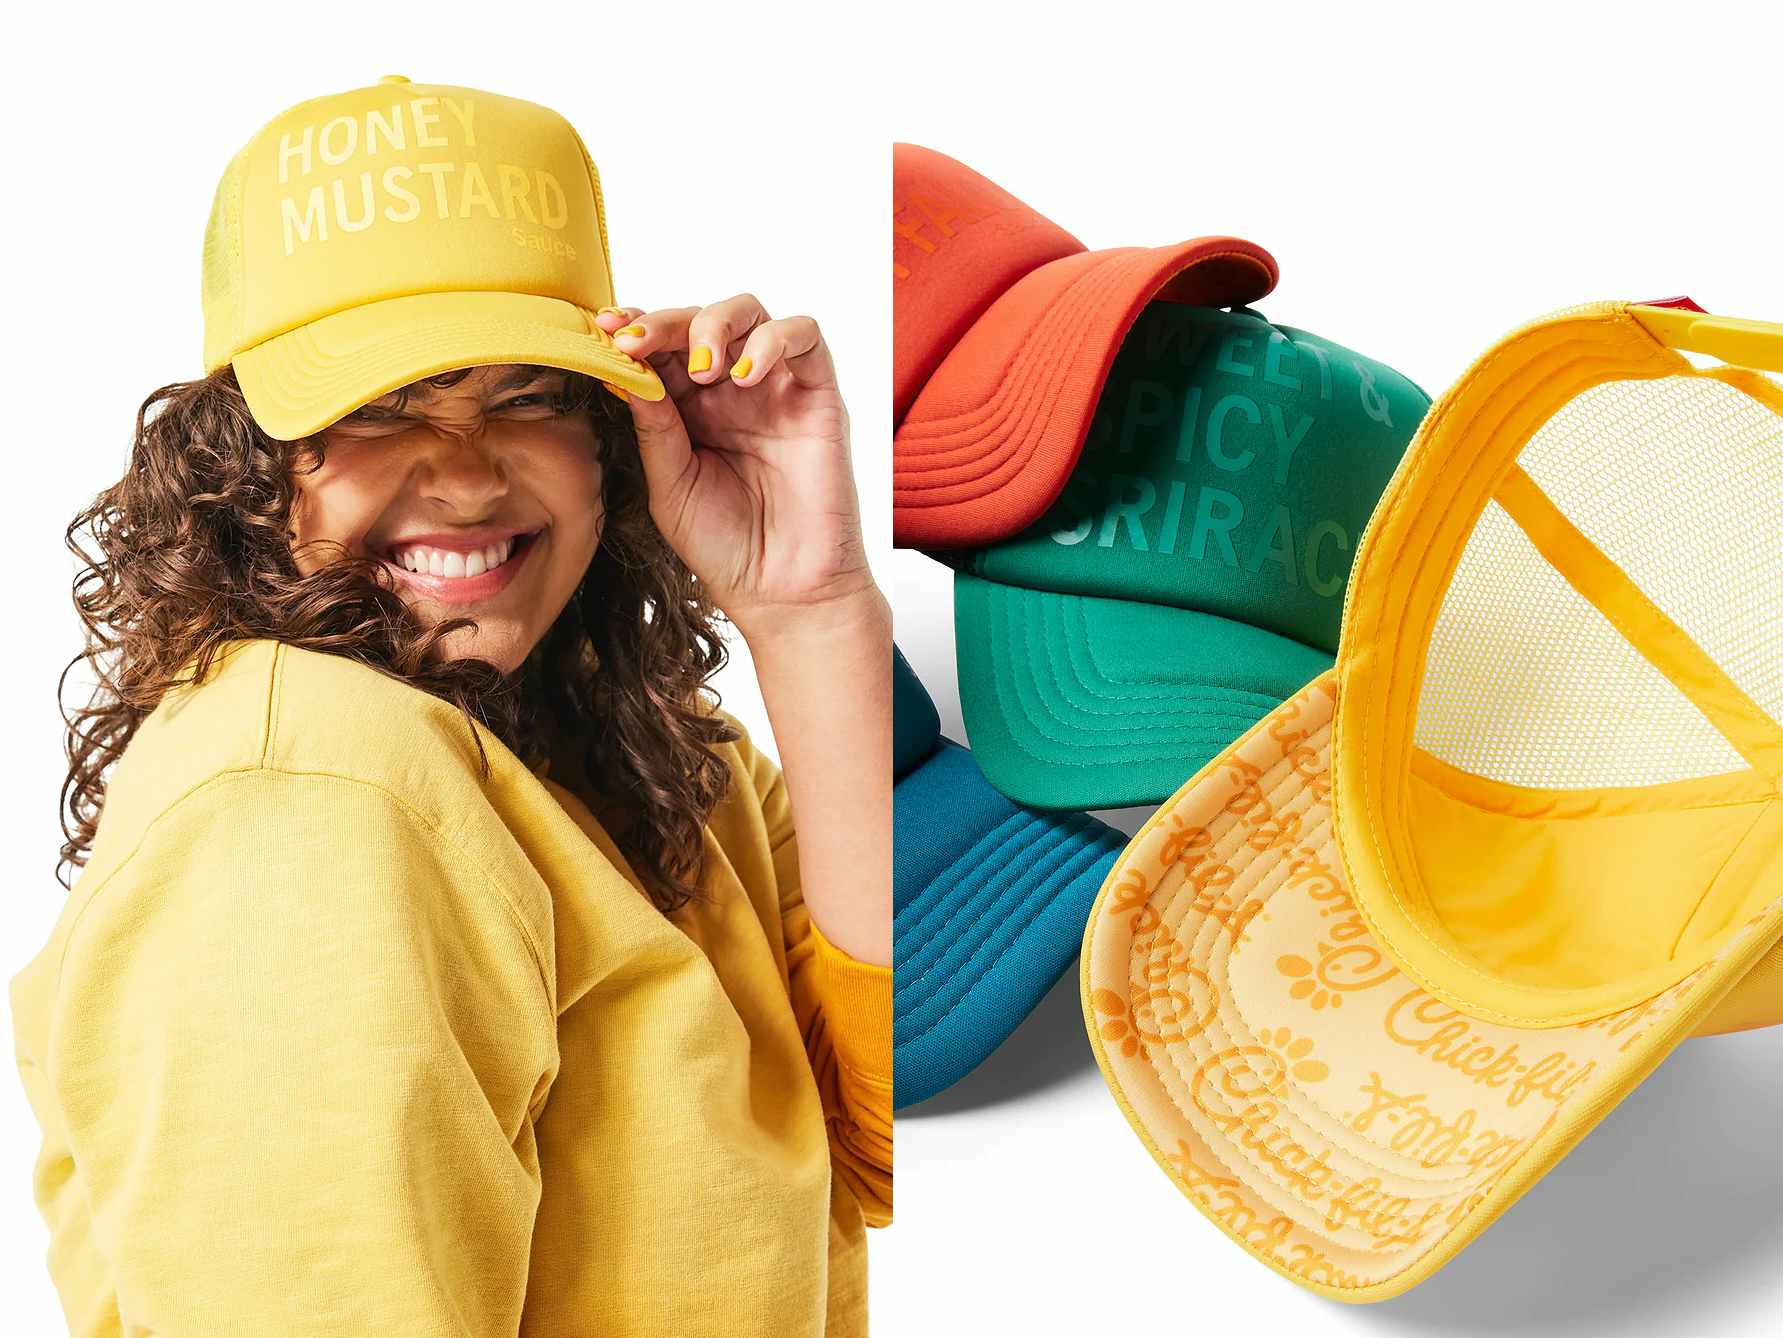 chick-fil-a sauce-inspired trucker hats